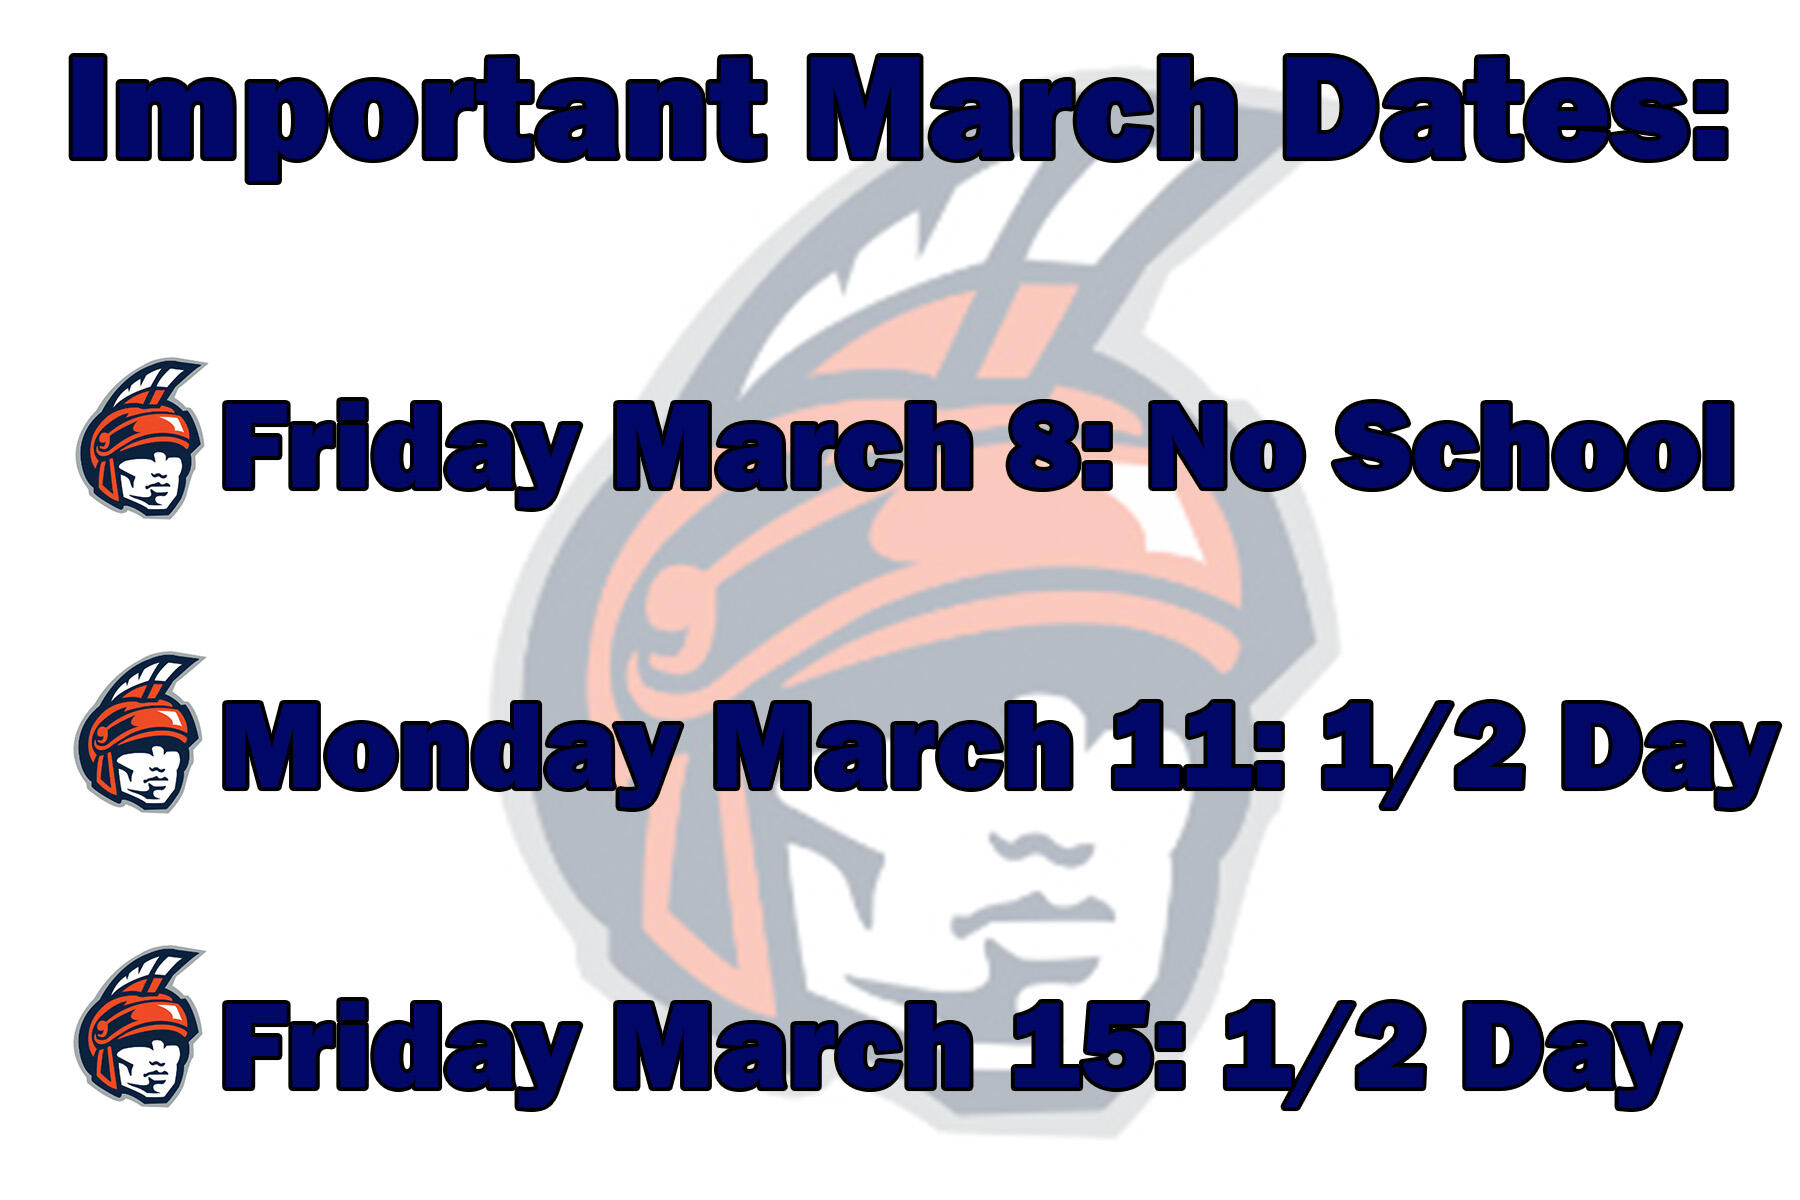 Important March dates - March 8 No School, March 11 Early Dismissal, March 15 Early Dismissal